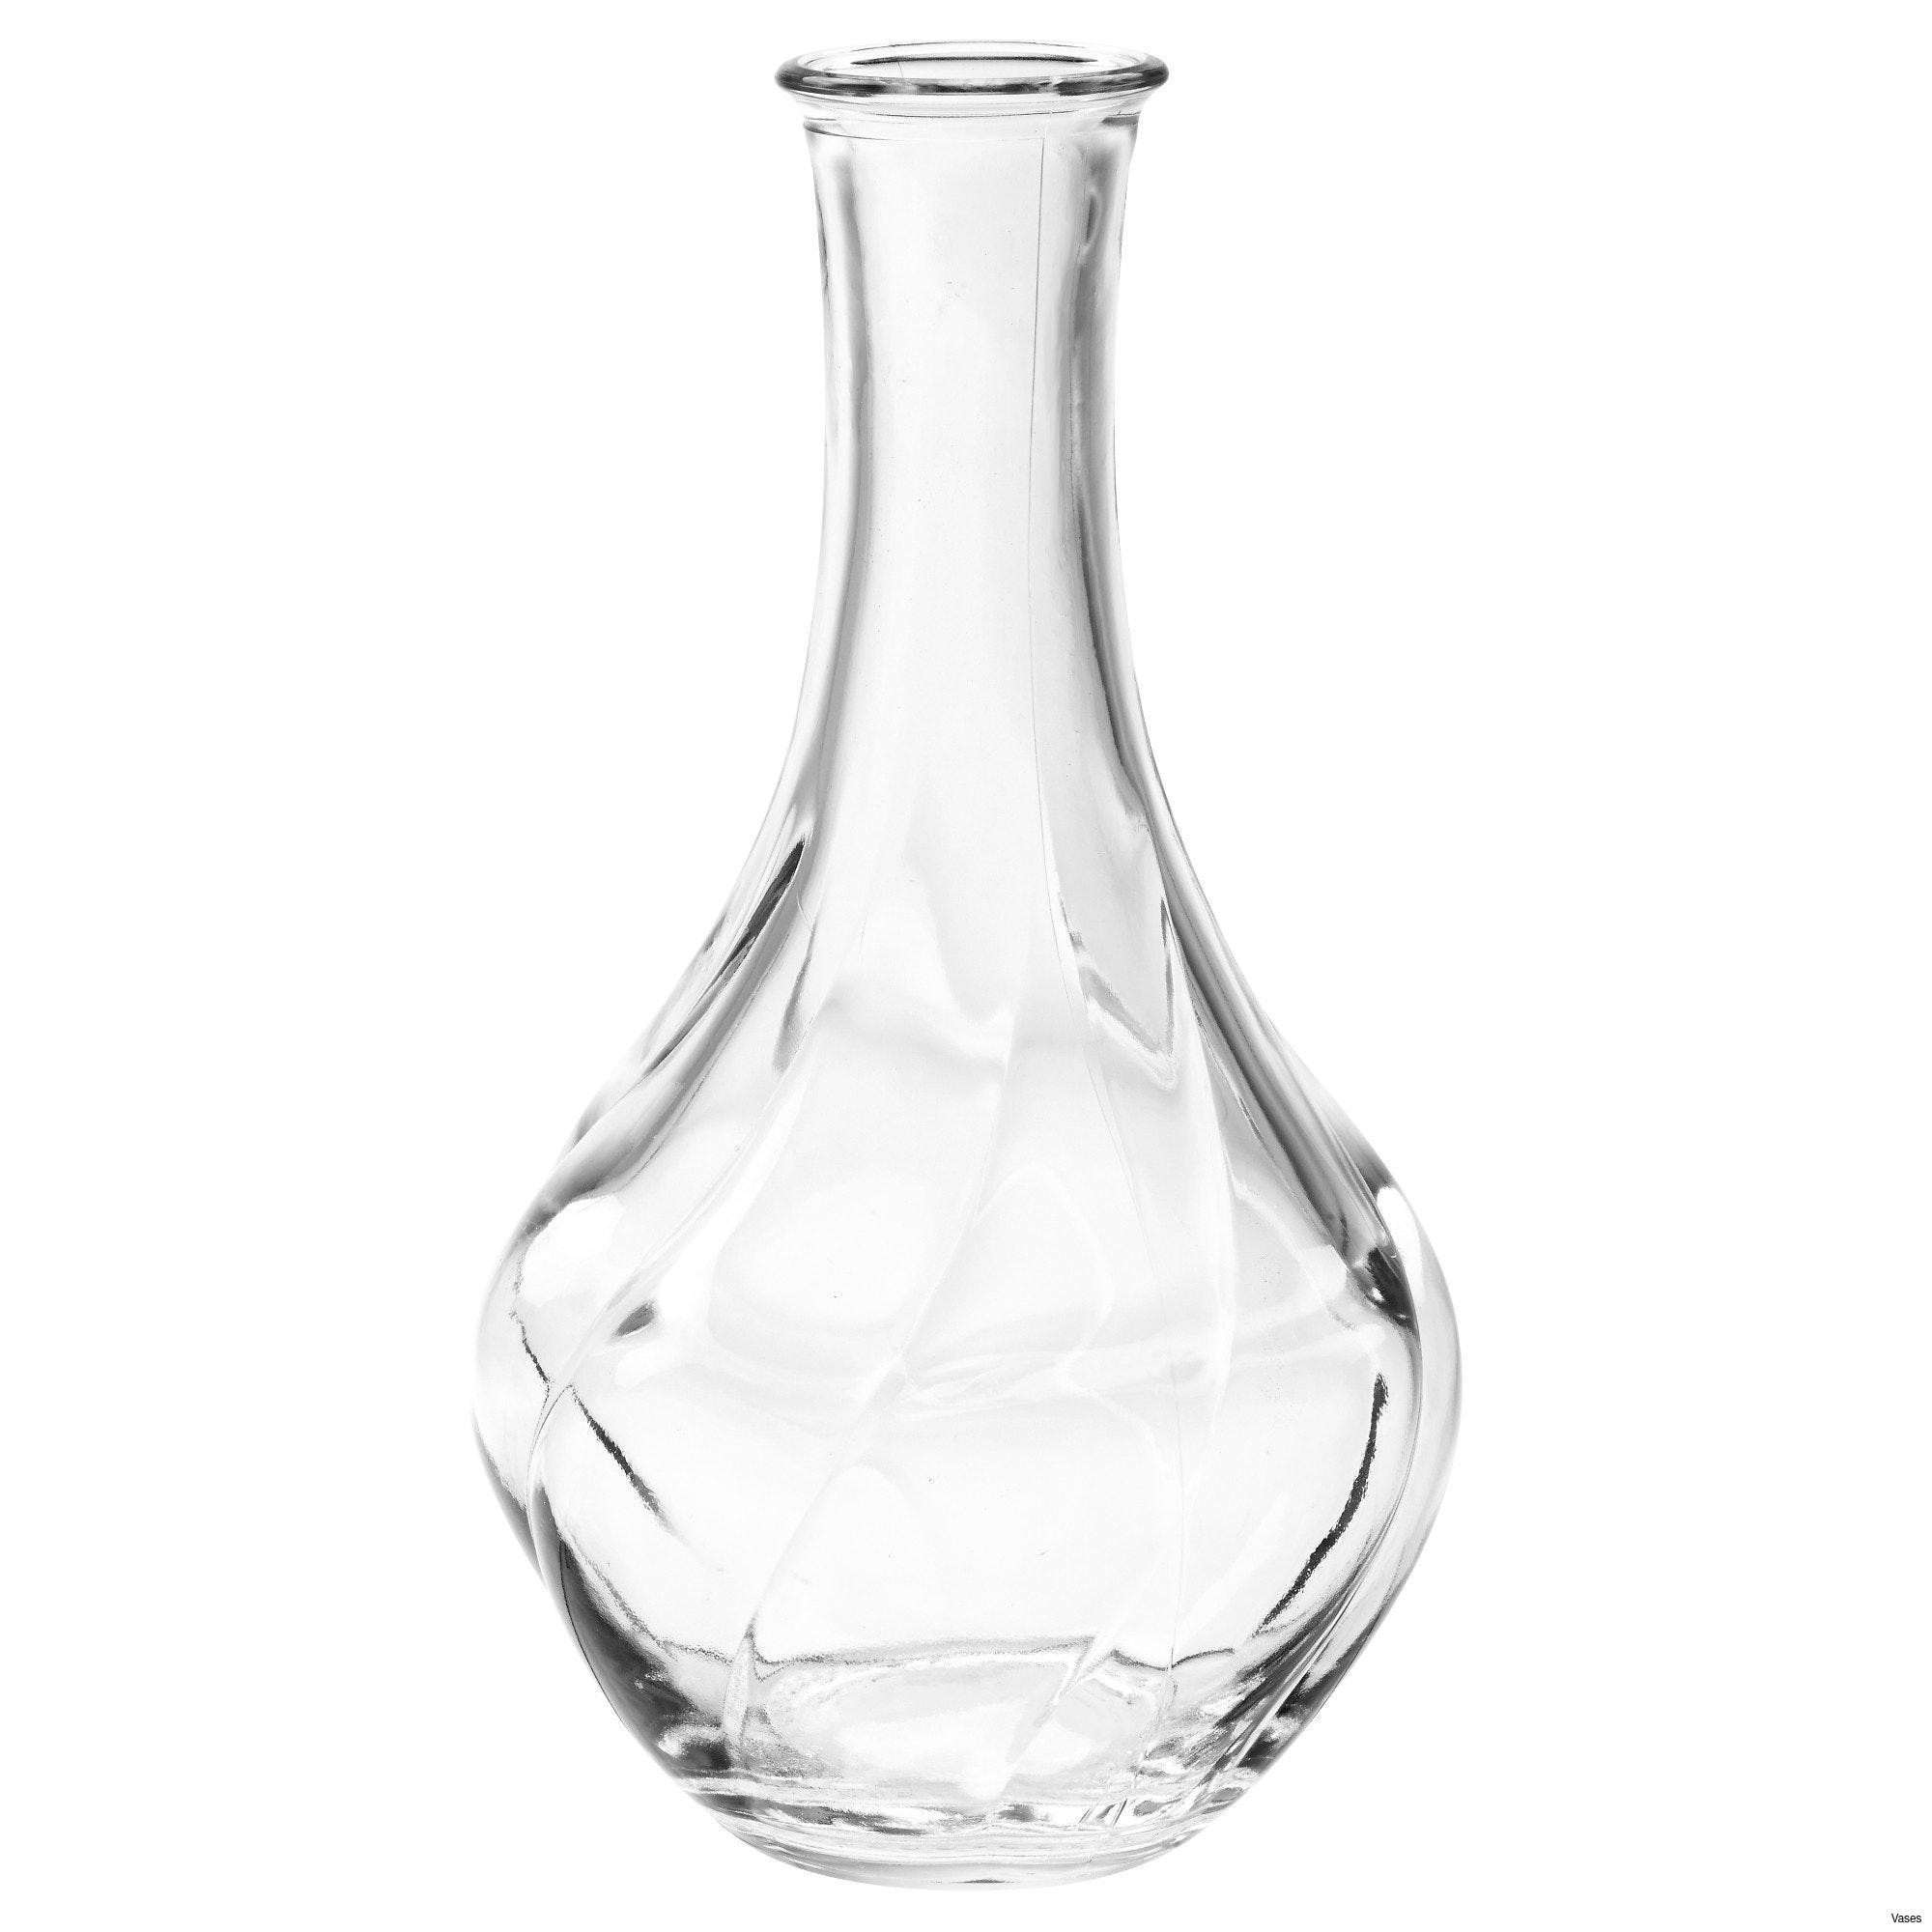 21 Awesome Waterford Blue Vase 2024 free download waterford blue vase of large white vases photos living room glass vases fresh clear vase 0d regarding large white vases photos living room glass vases fresh clear vase 0d tags amazing and of